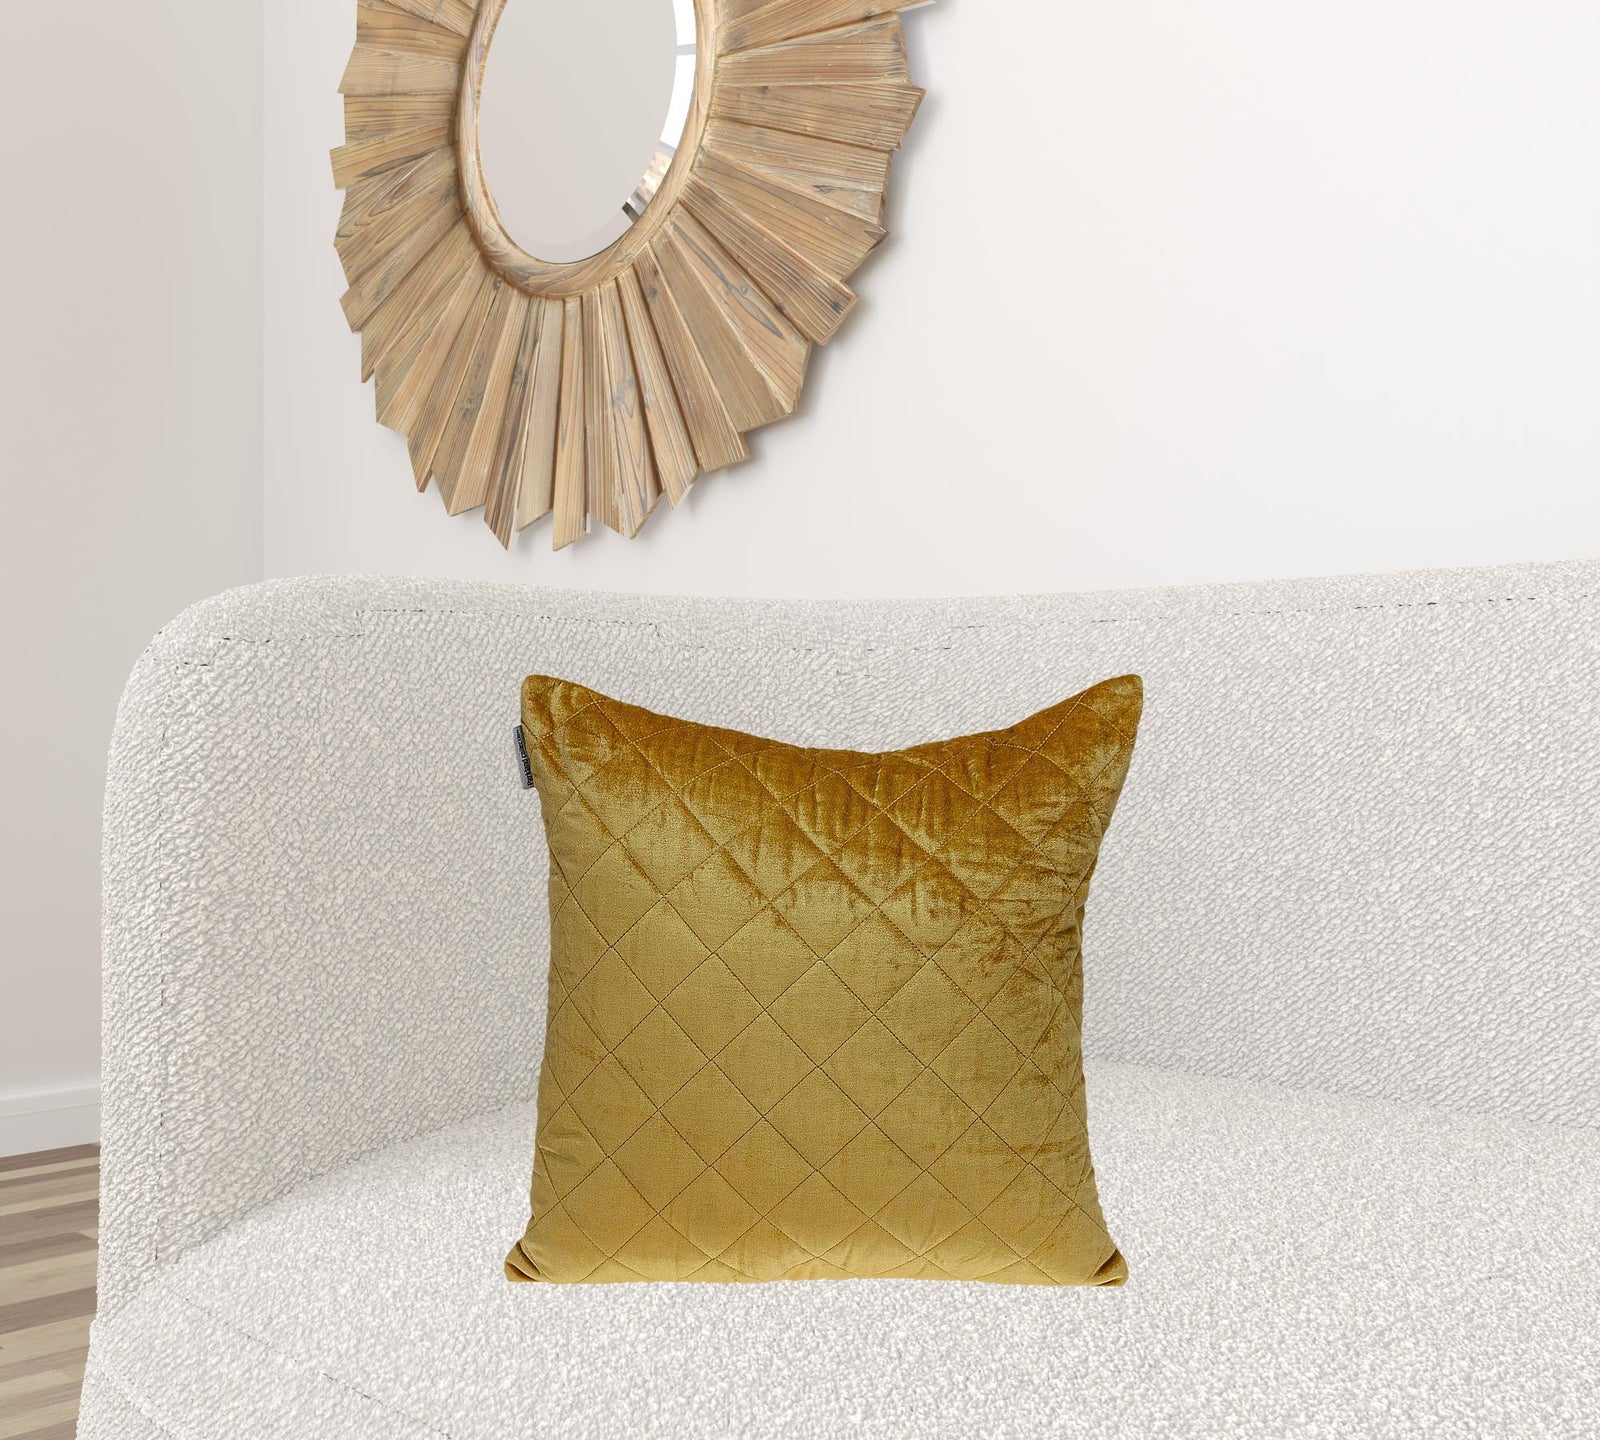 Tufted Diamond Yellow Ochre Transitional Square Pillow